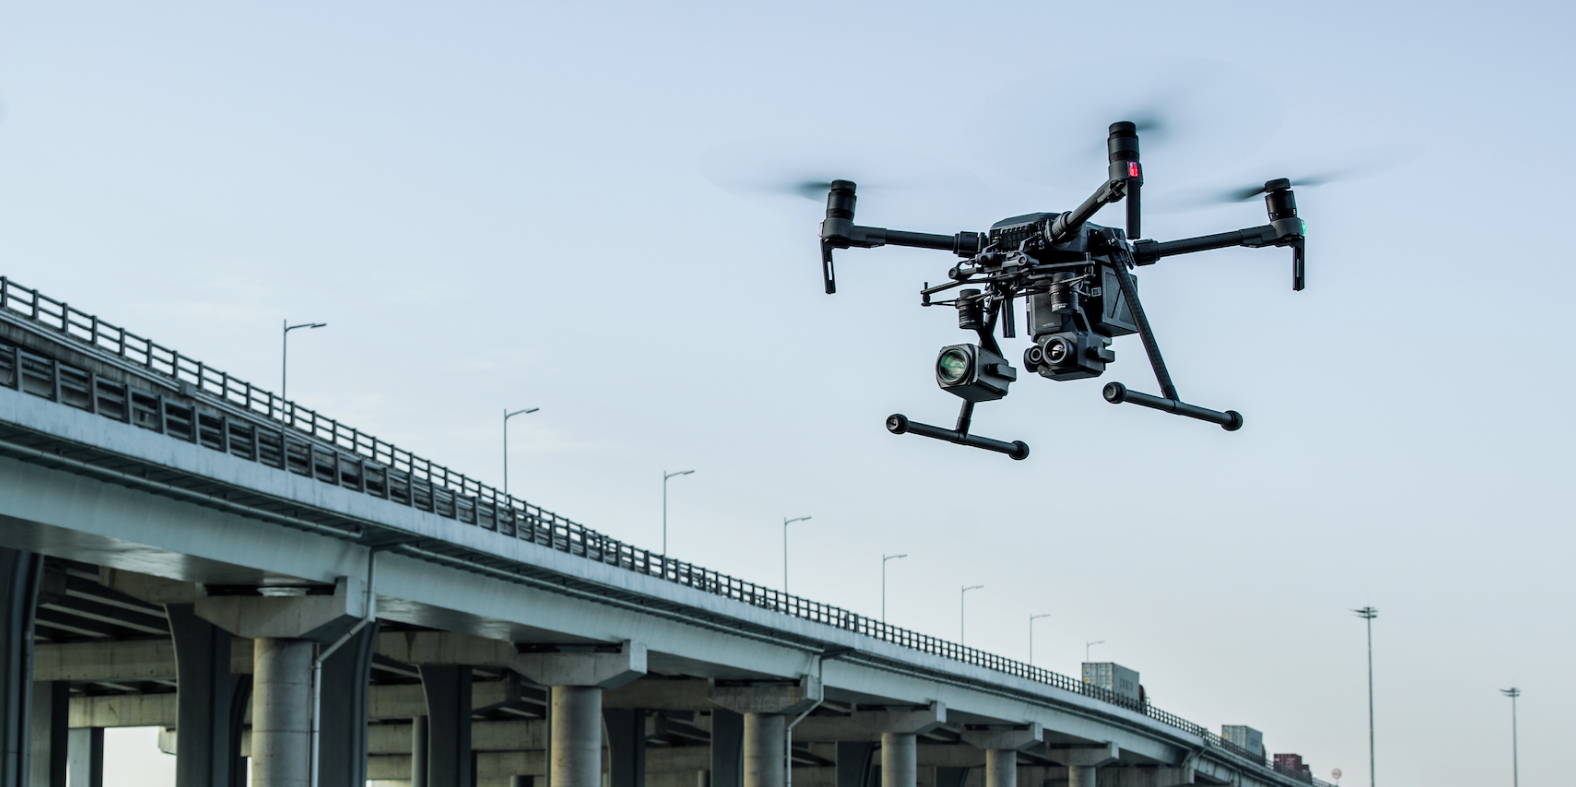 DJI Drones Qualify for RPAS Safety Assurance From Transport Canada For Advanced Operations